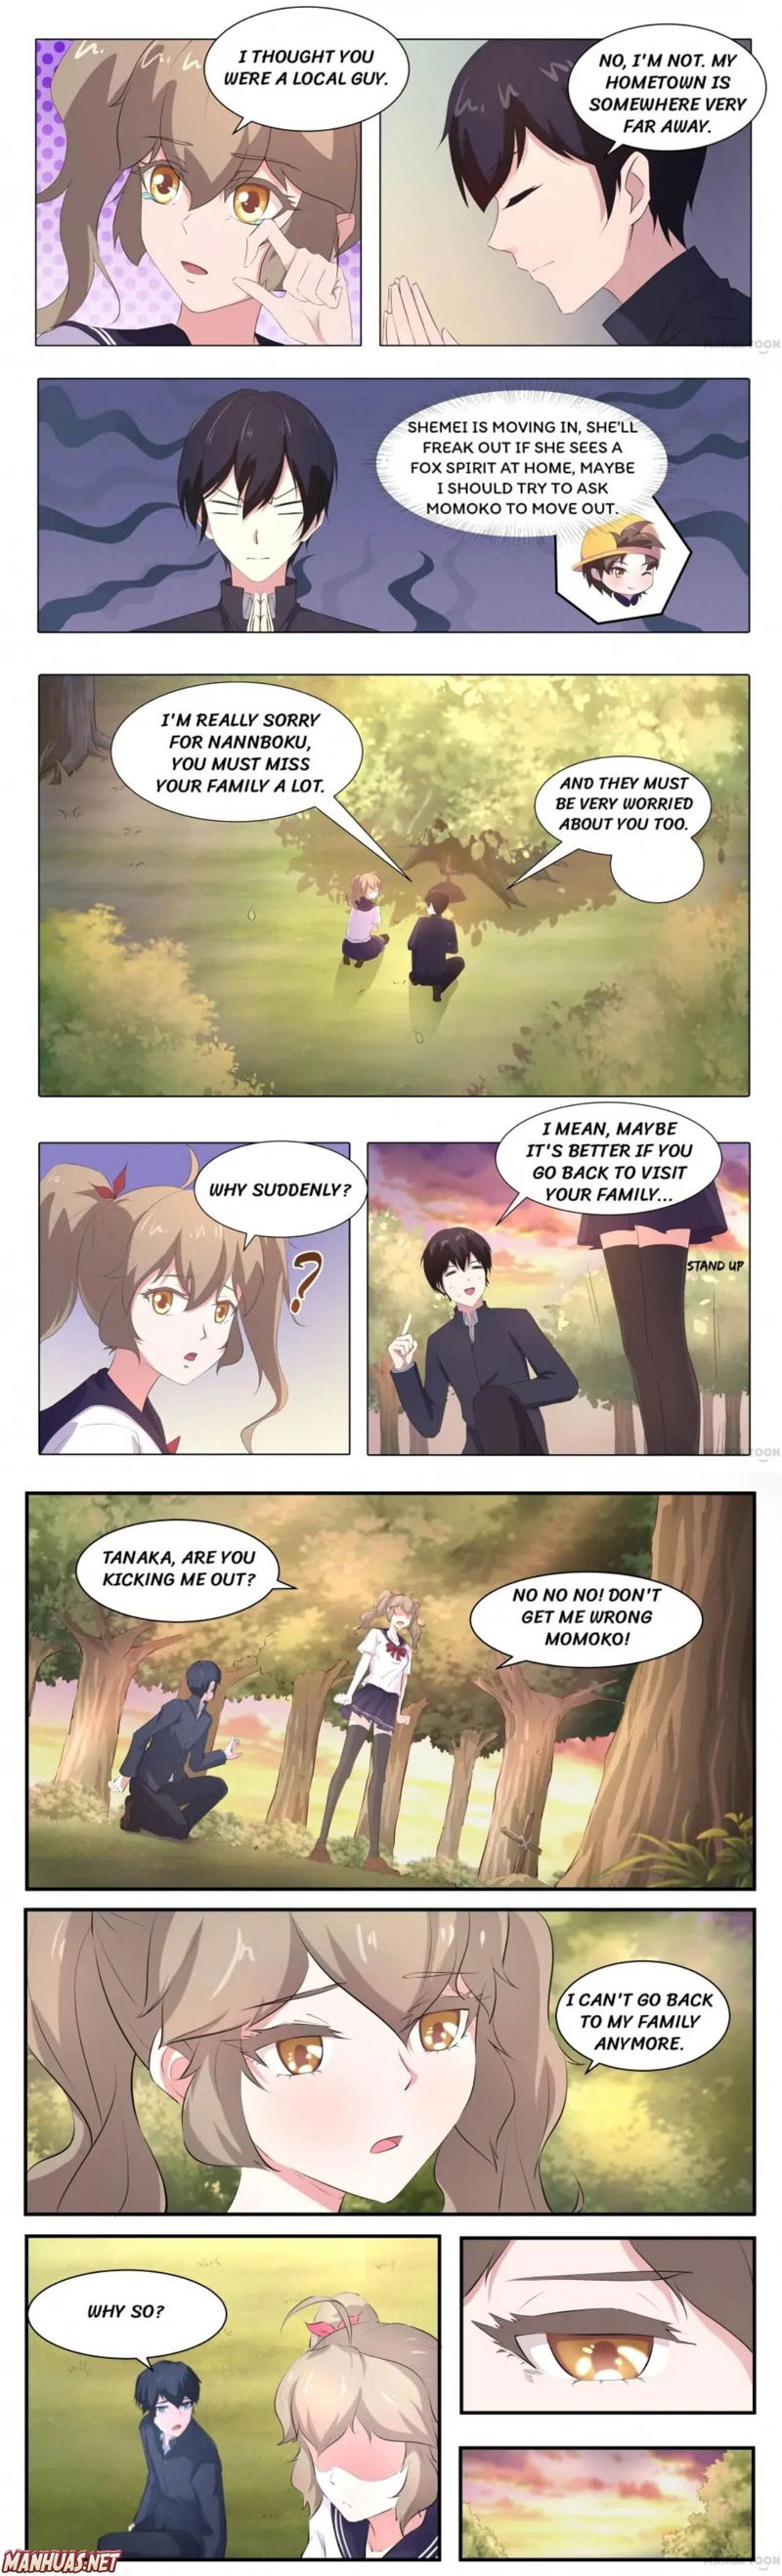 High School Taoist Chapter 58 page 4